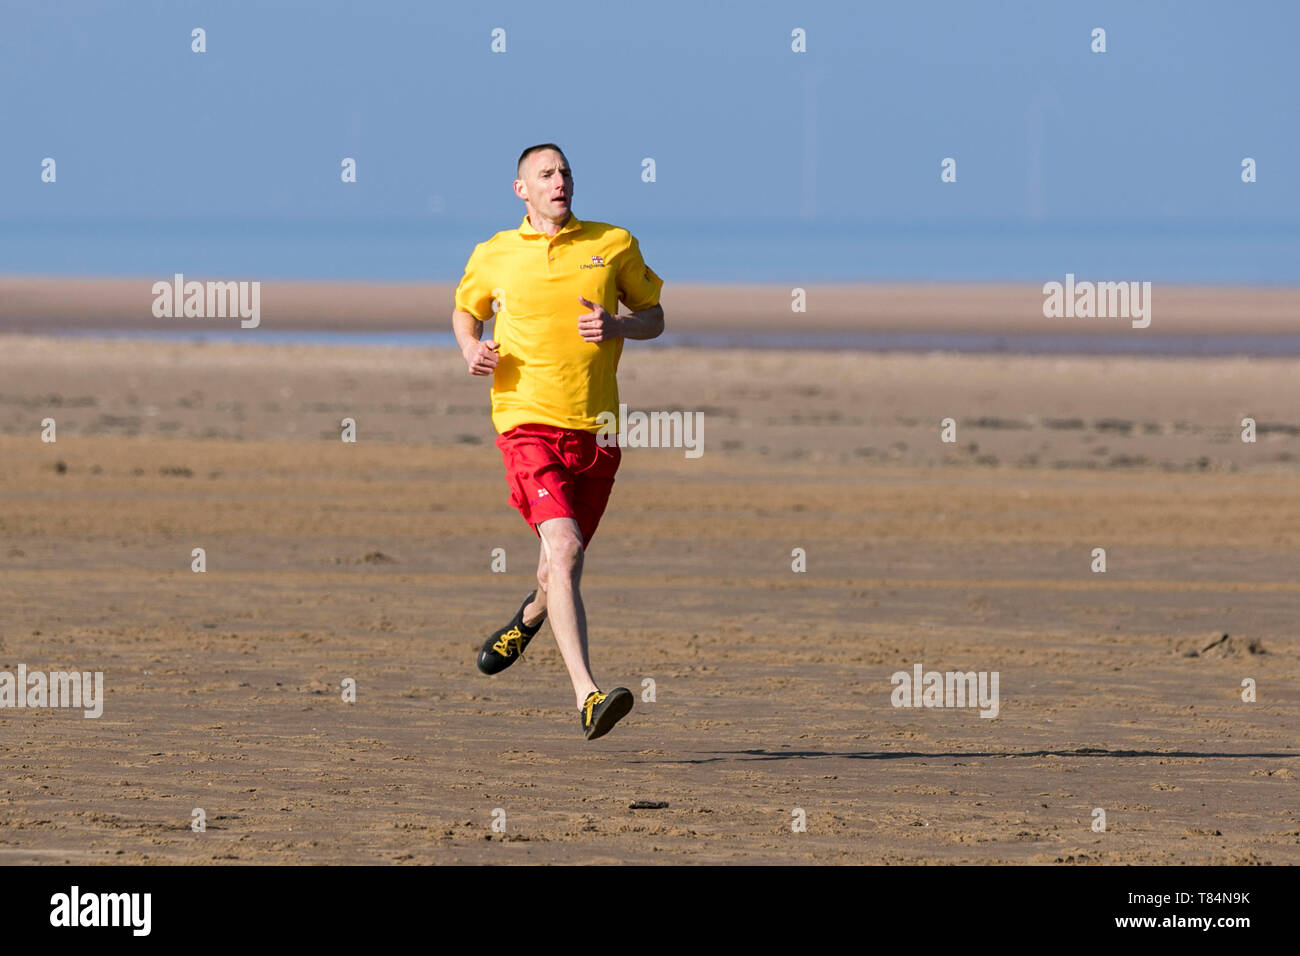 Southport, Merseyside, UK. 11th May 2019. RNLI Lifeguard Training.  An RNLI lifeguard trainee is put through his paces as he aspires to reach the level of fitness required to protect beachgoers during the upcoming summer season.  RNLI lifeguards and lifeboat crews work together, responding to the thousands of incidents that happen every year around the coast.  Credit: Cernan Elias/Alamy Live News Stock Photo